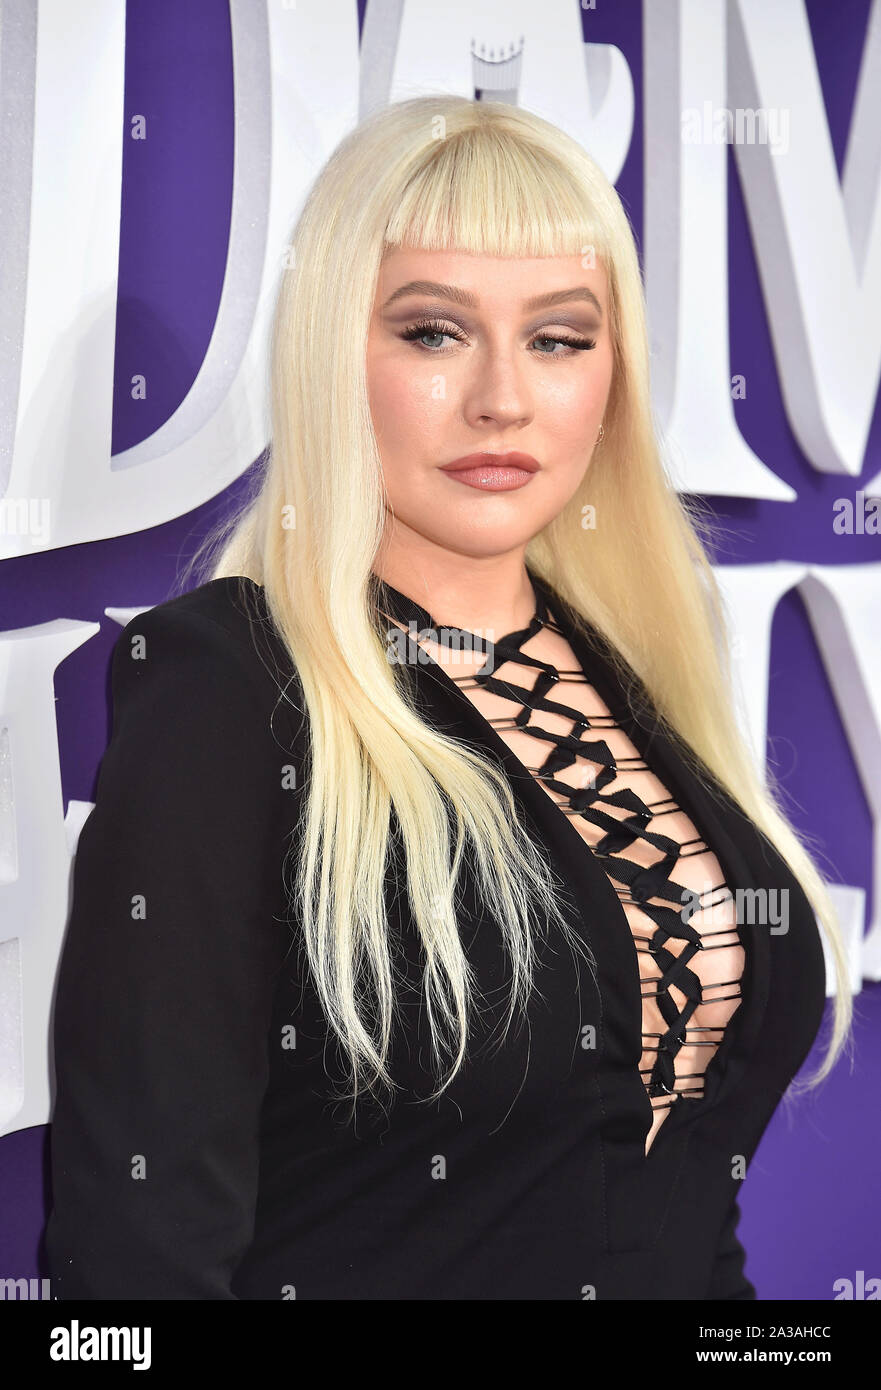 CENTURY CITY, CA - OCTOBER 06: Christina Aguilera attends the Premiere of MGM's 'The Addams Family' at Westfield Century City AMC on October 06, 2019 in Los Angeles, California. Stock Photo